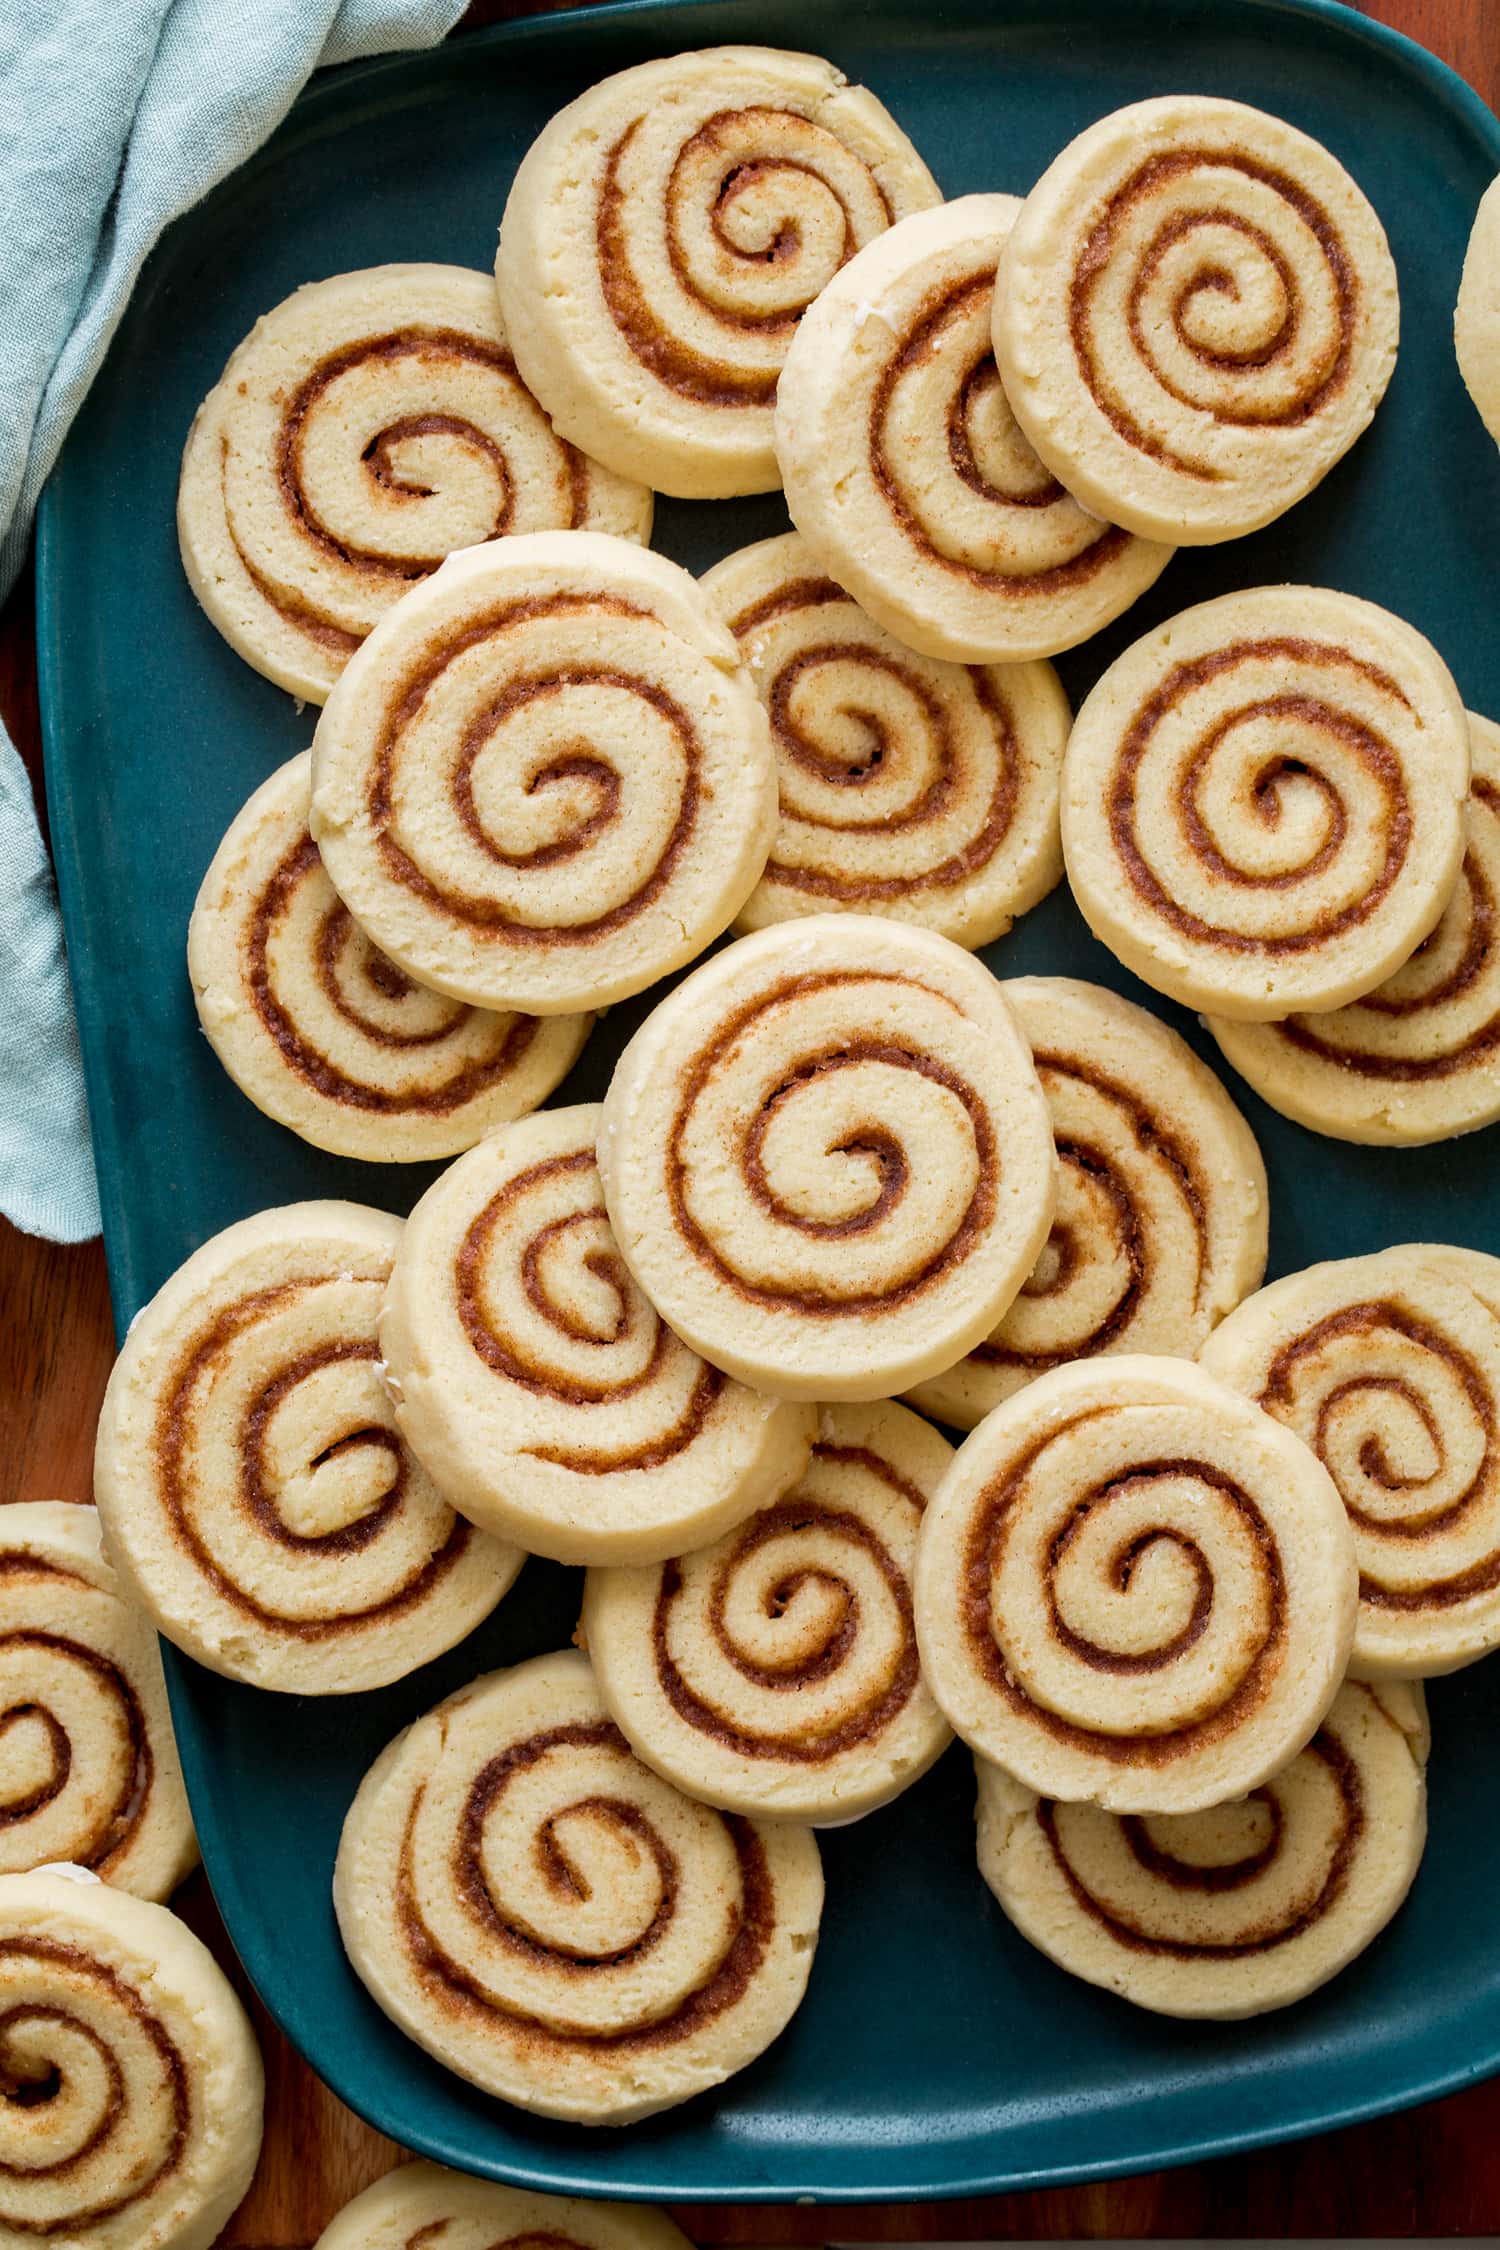 Cinnamon Roll cookies shown close up on a blue turquoise platter.